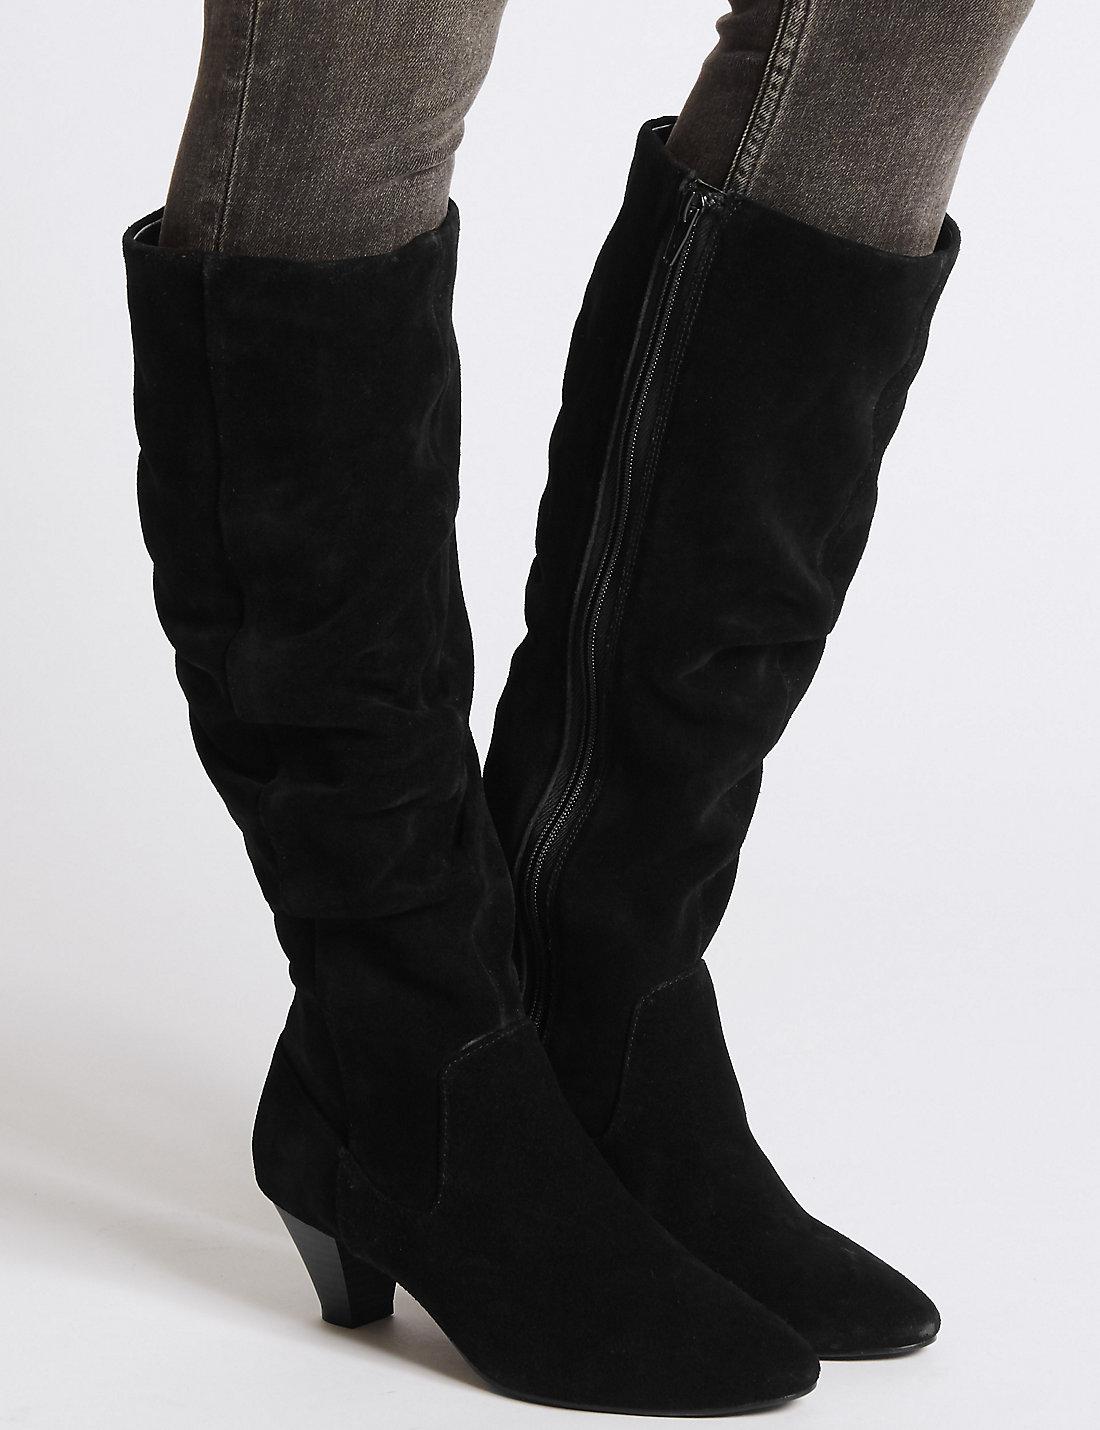 marks and spencer black knee high boots